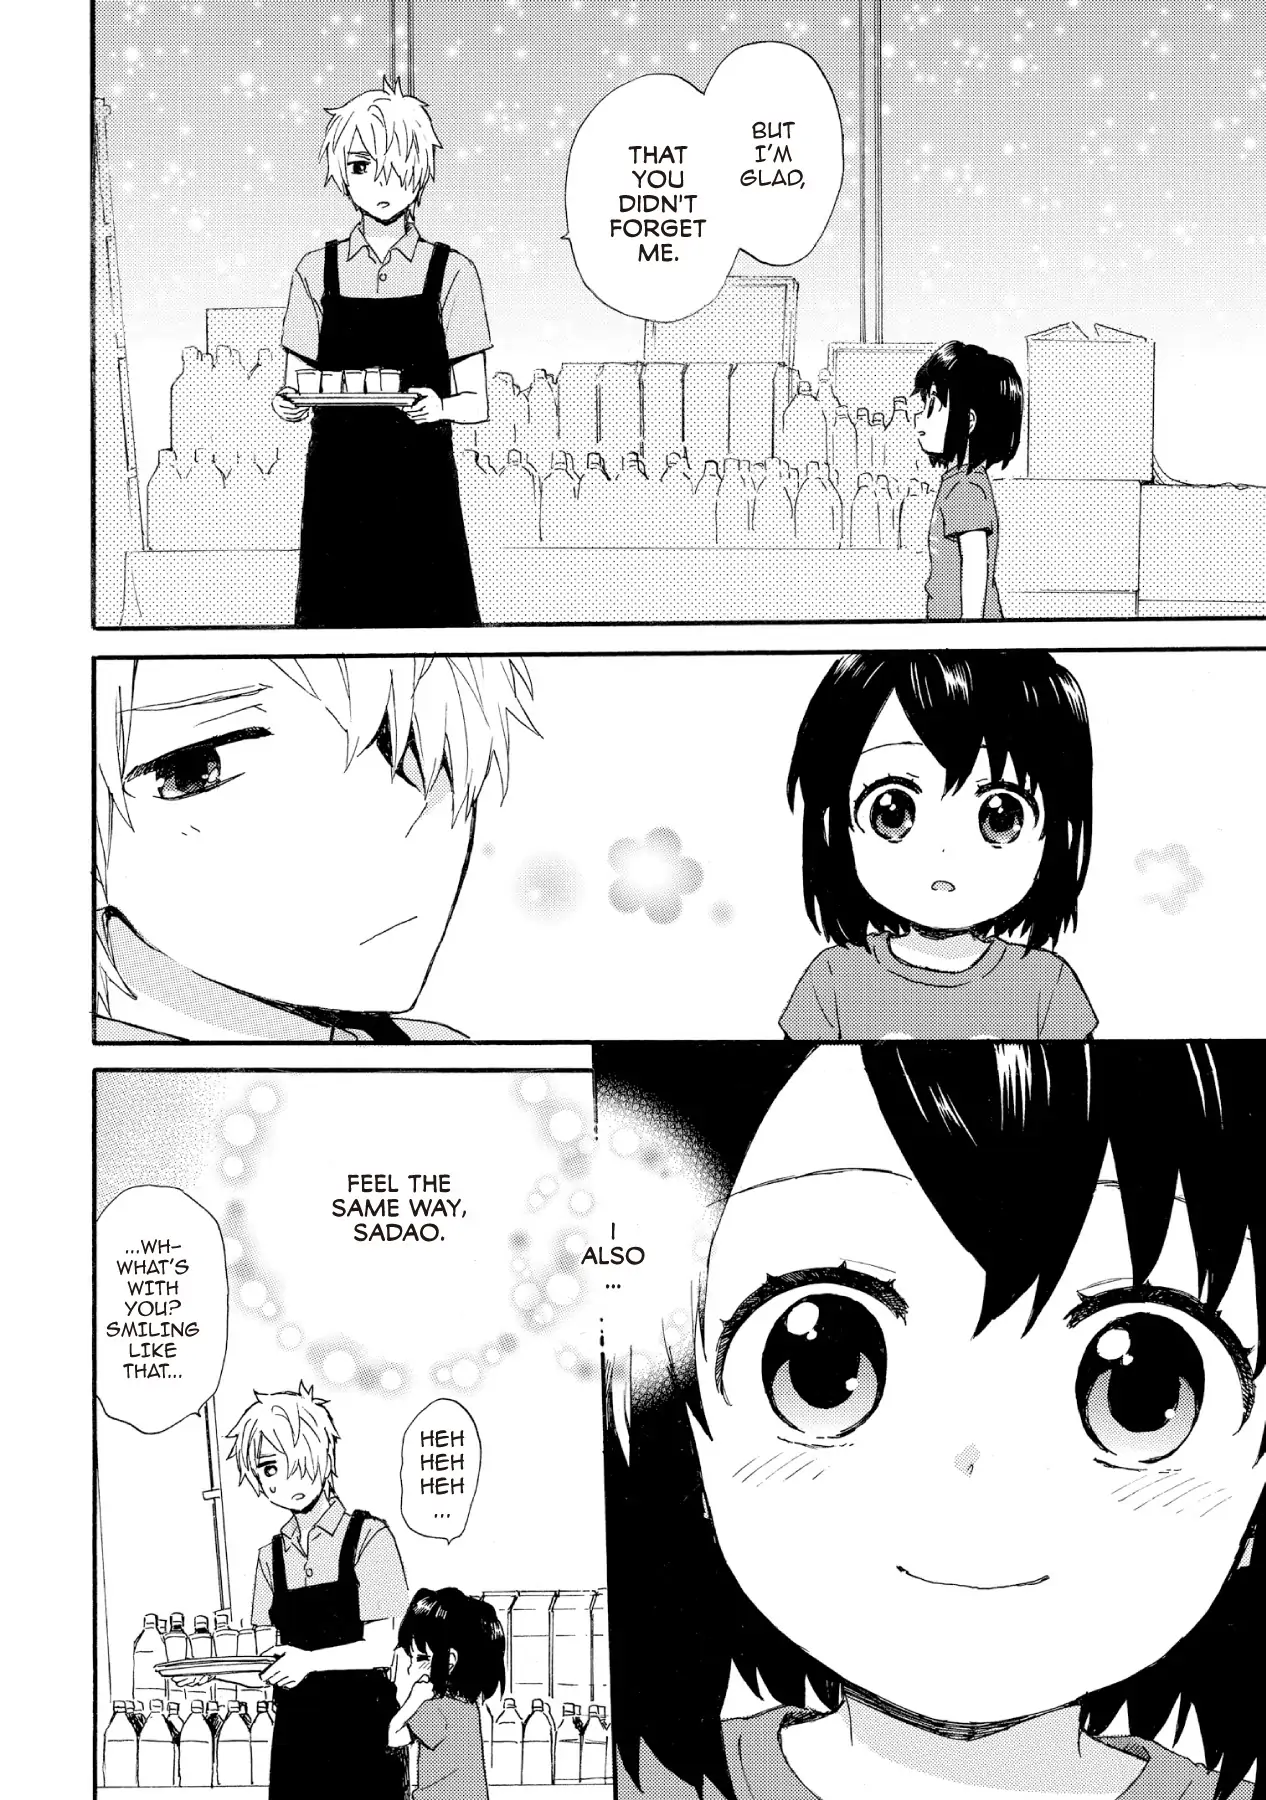 The Cute Little Granny Girl Hinata-chan - chapter 62 - #6